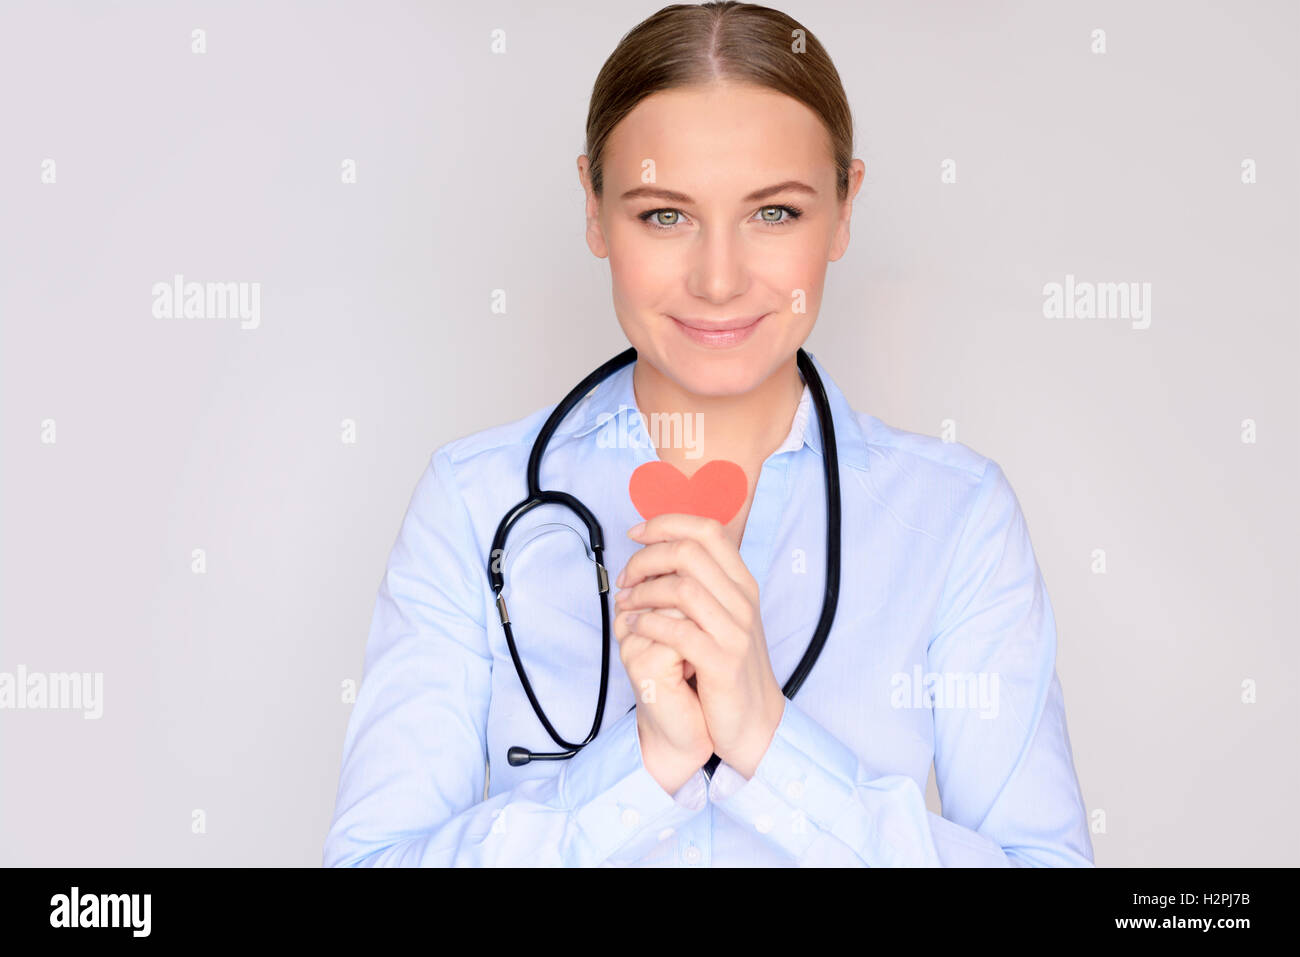 Good cardiologist, portrait of a nice doctor with conceptual heart in hands over clean background Stock Photo